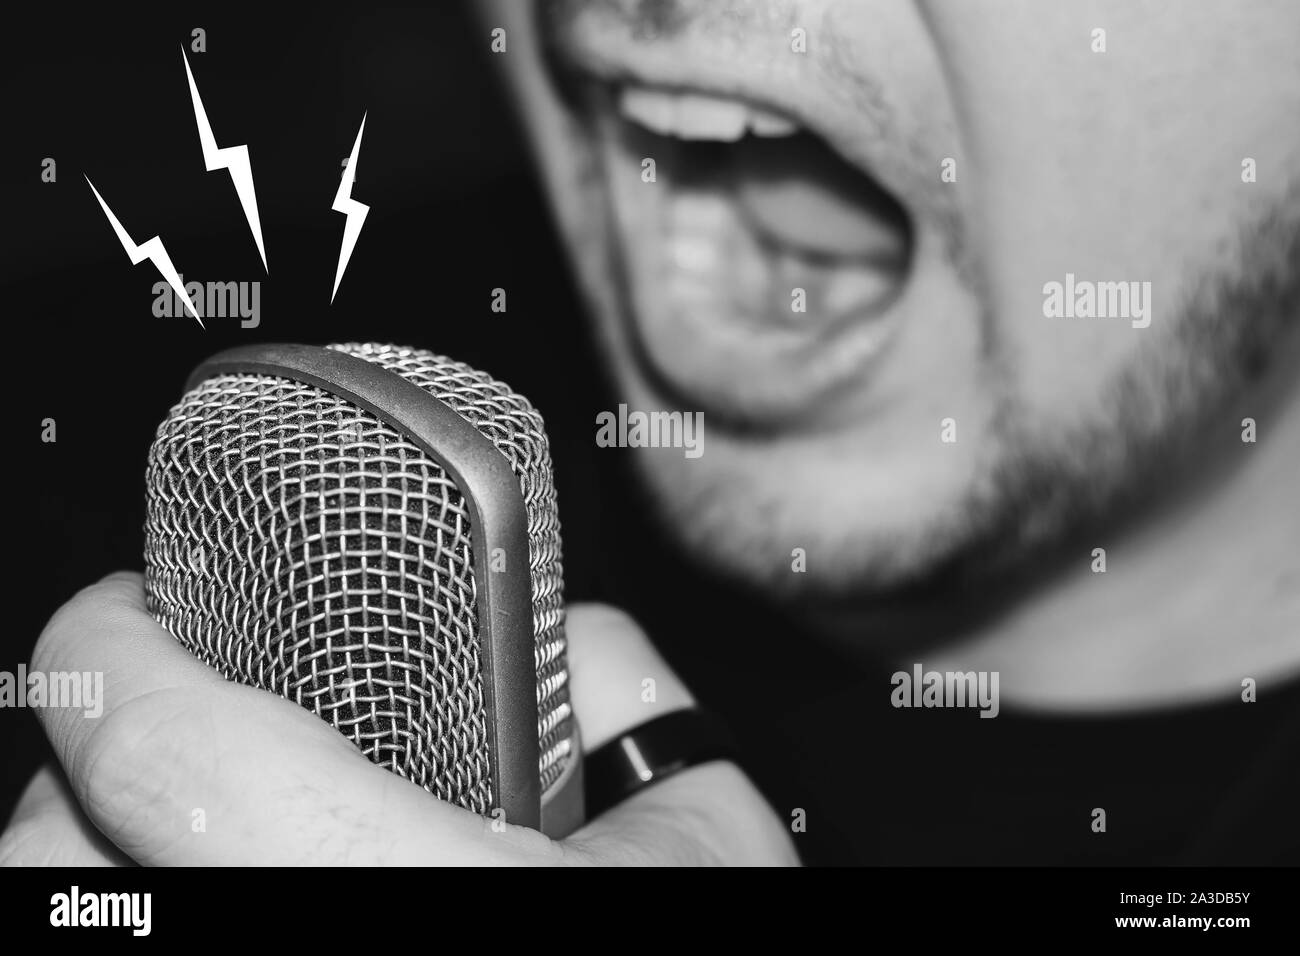 Man screaming on the microphone. Singing heavy metal. Close-up on a man wearing black, holding a studio microphone. Stock Photo